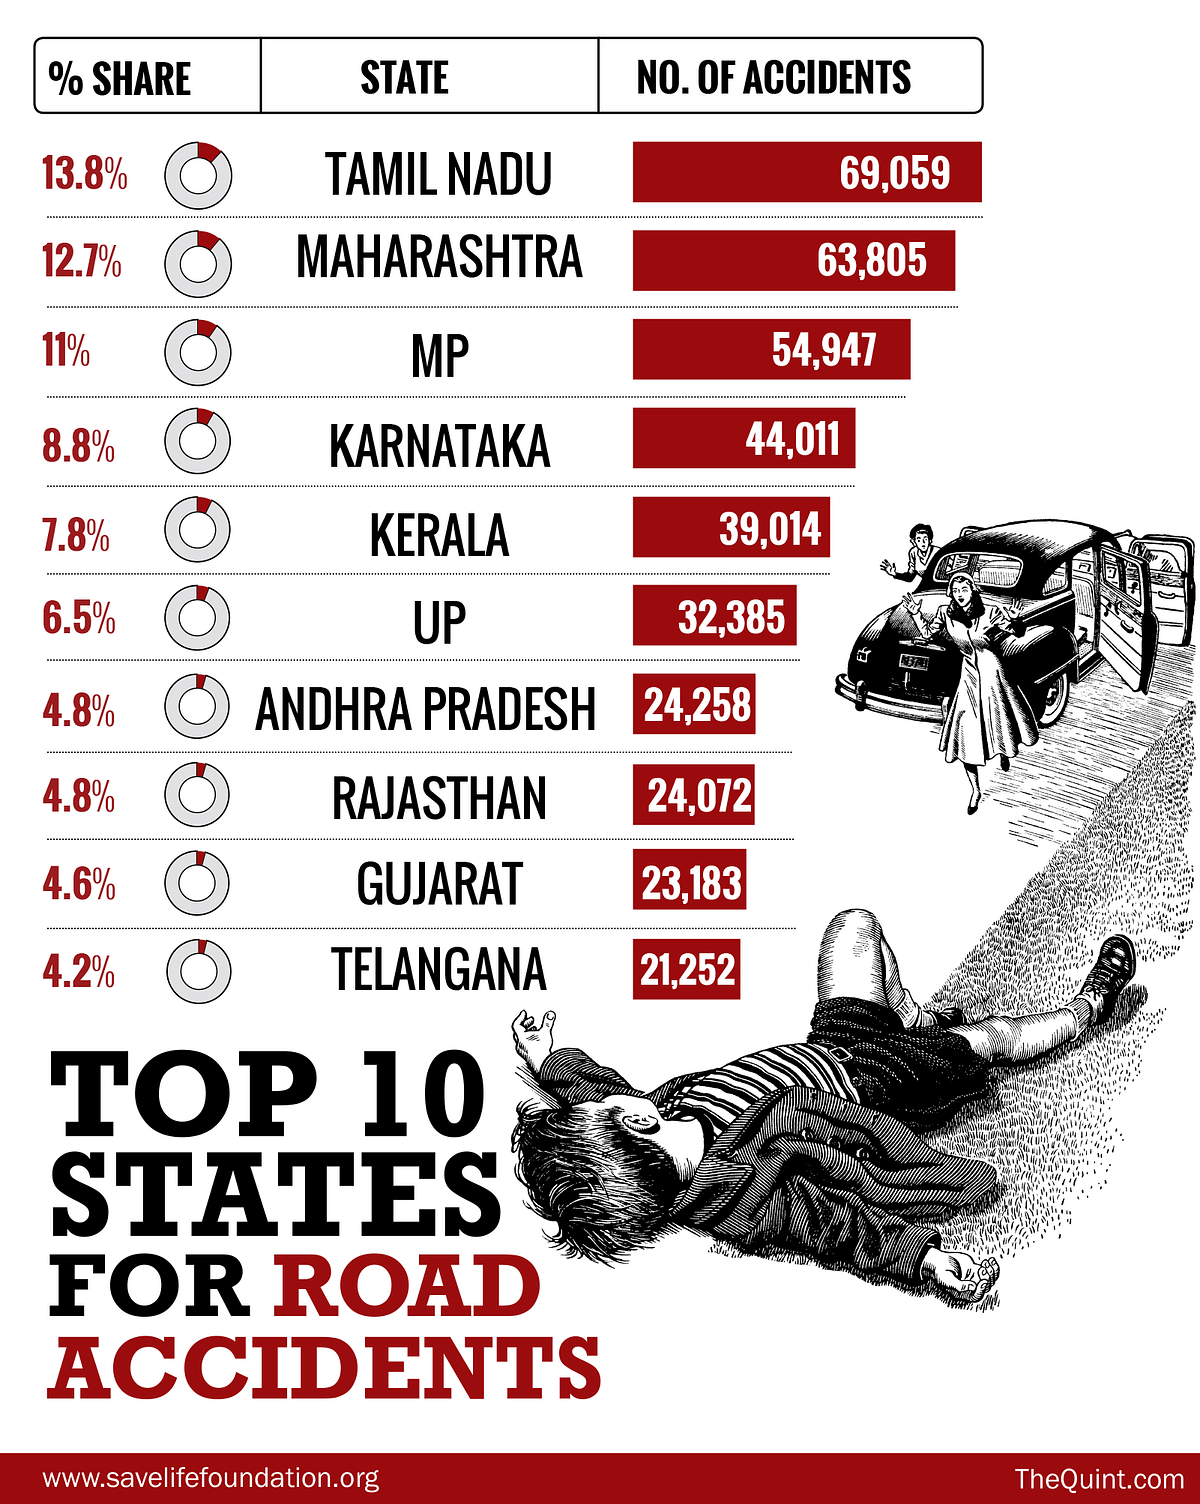 Over 1 lakh people were killed on roads in India in 2015.